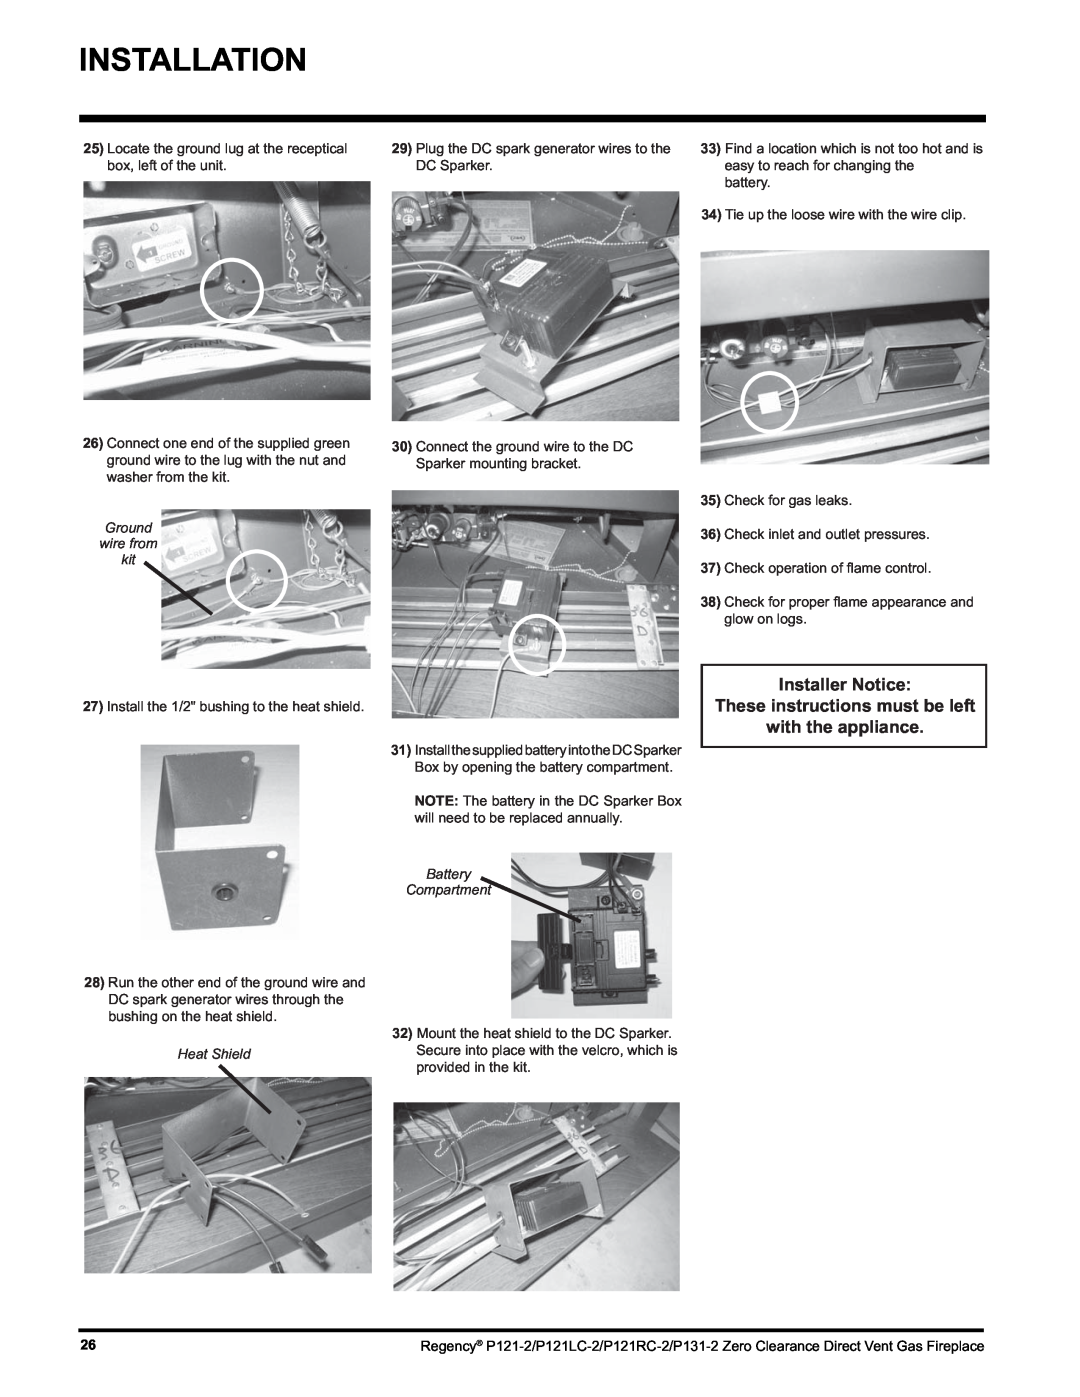 Regency P121LC Installer Notice These instructions must be left, with the appliance, Ground wire from kit, Heat Shield 